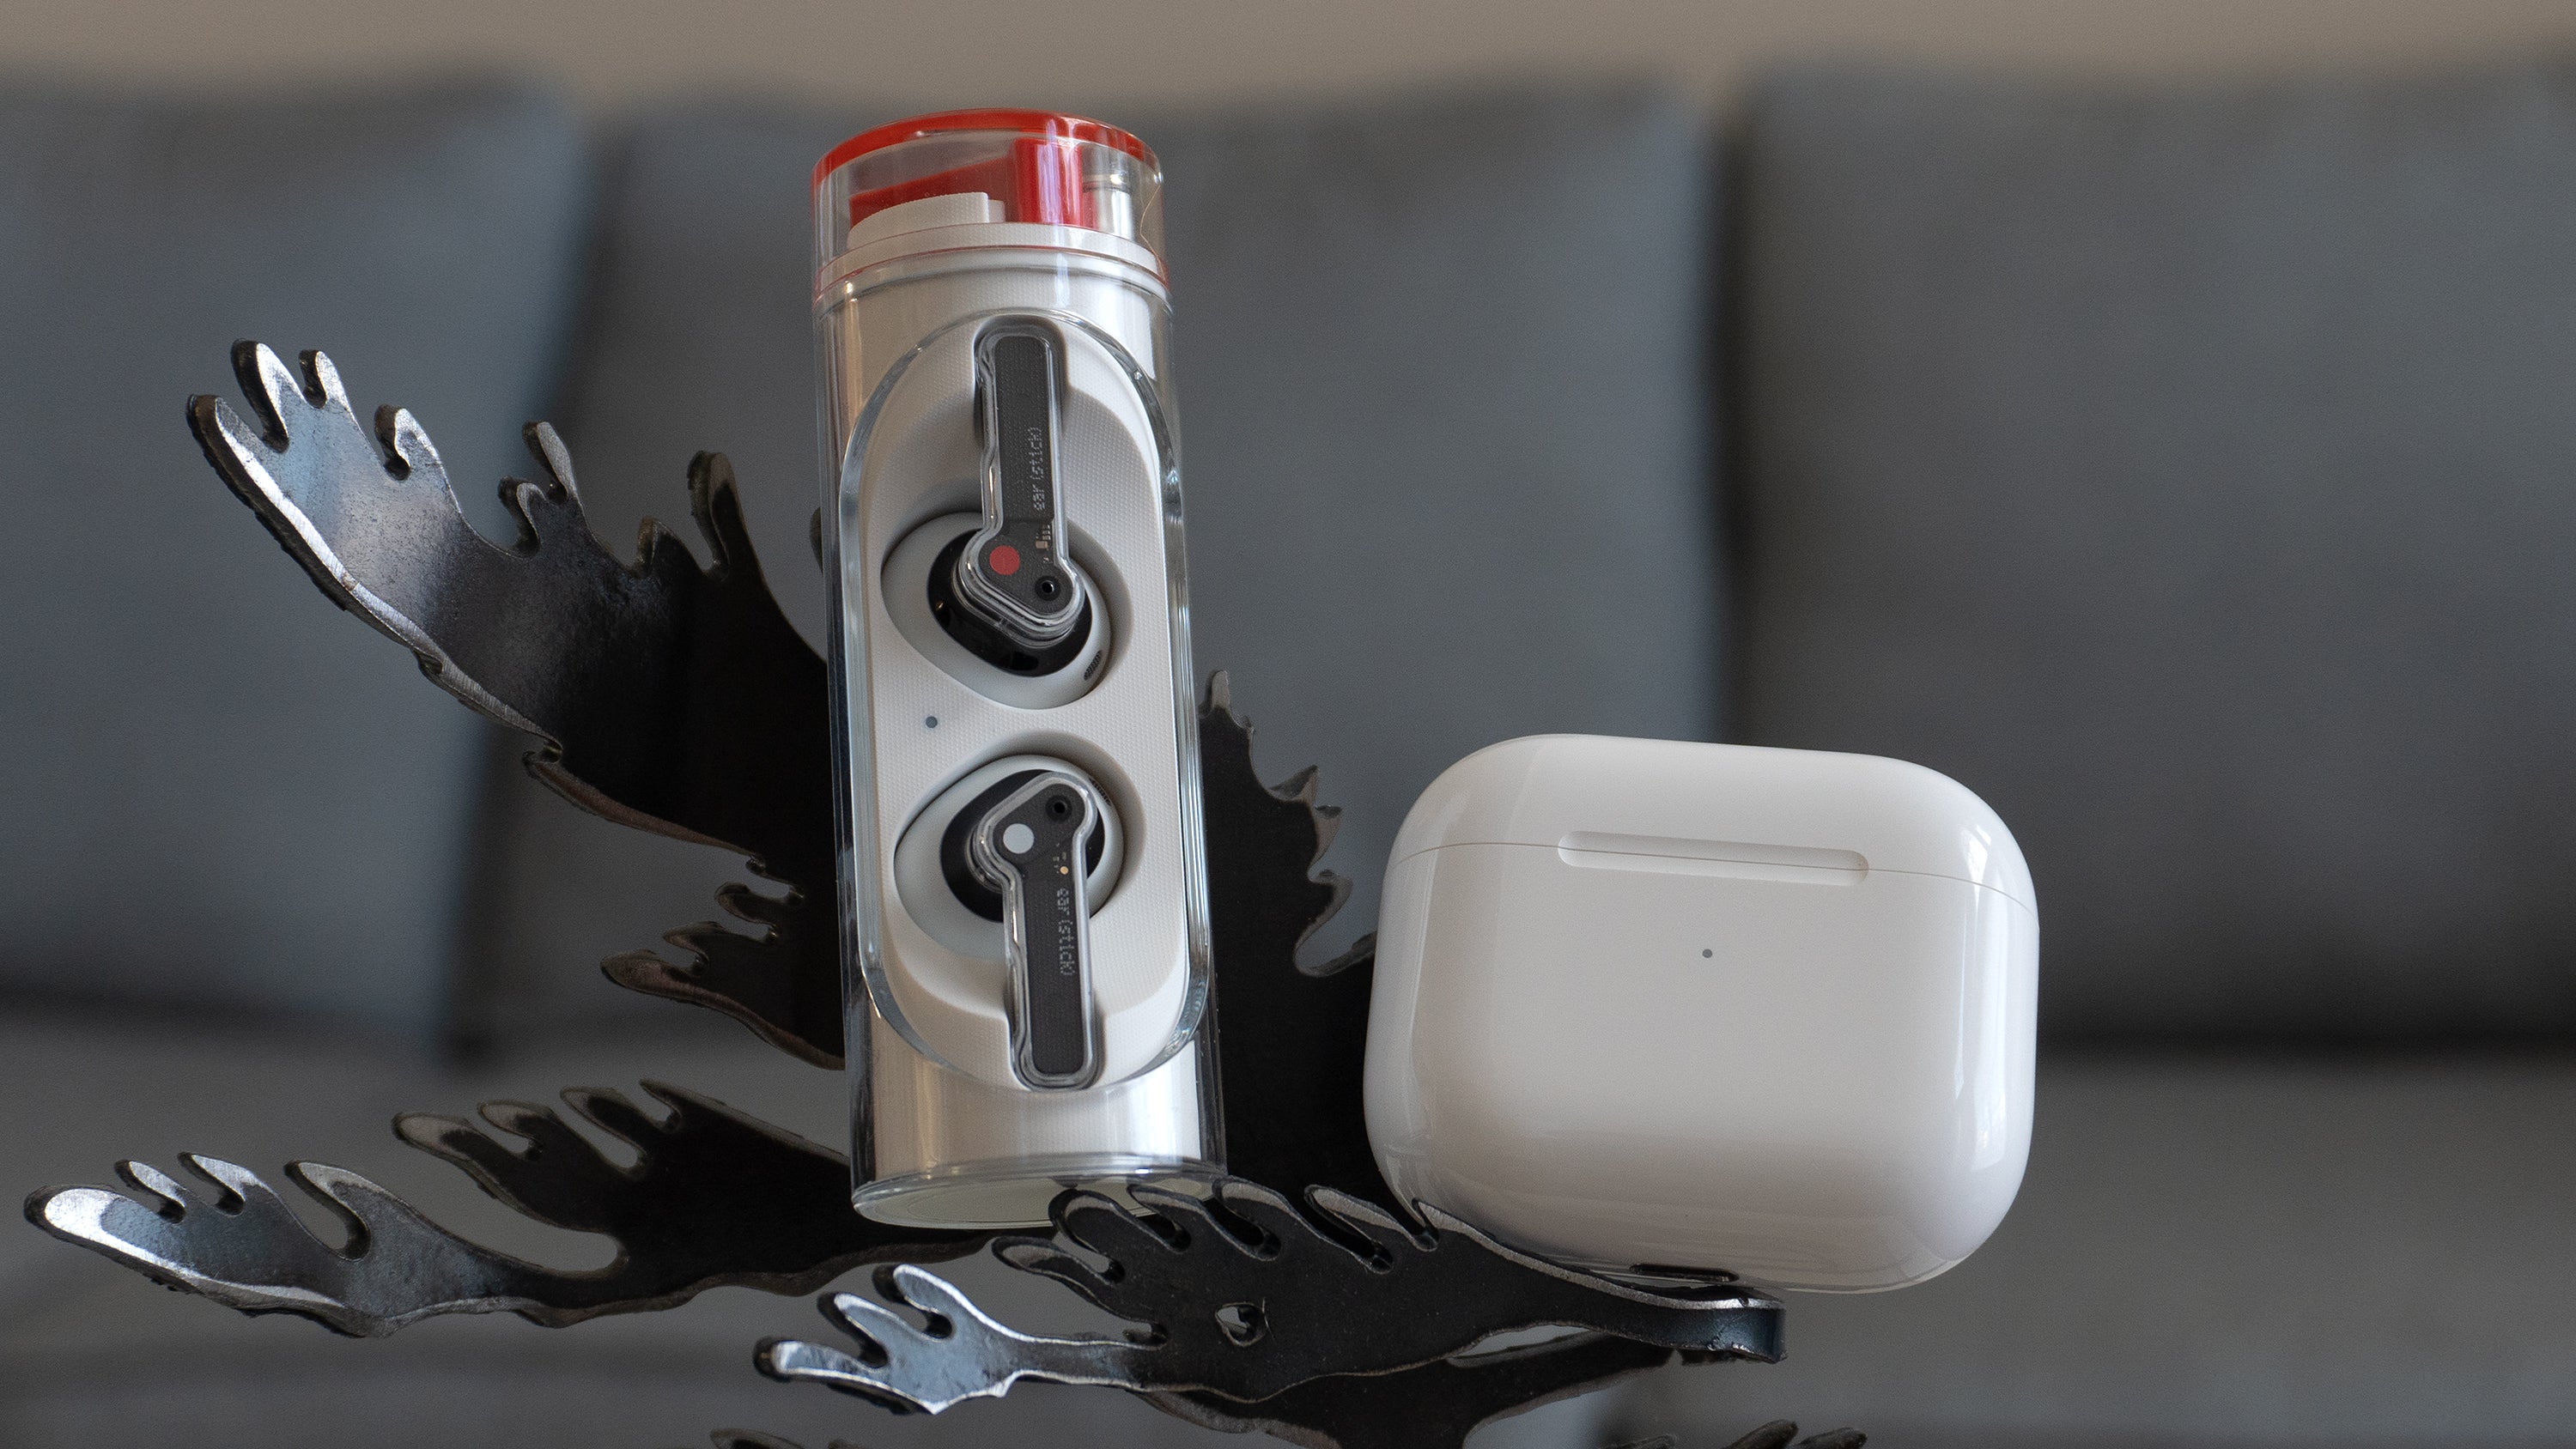 The Nothing Ear (stick)'s cylindrical charging case compared to the third-gen AirPods very compact charging case (right). (Photo: Andrew Liszewski | Gizmodo)